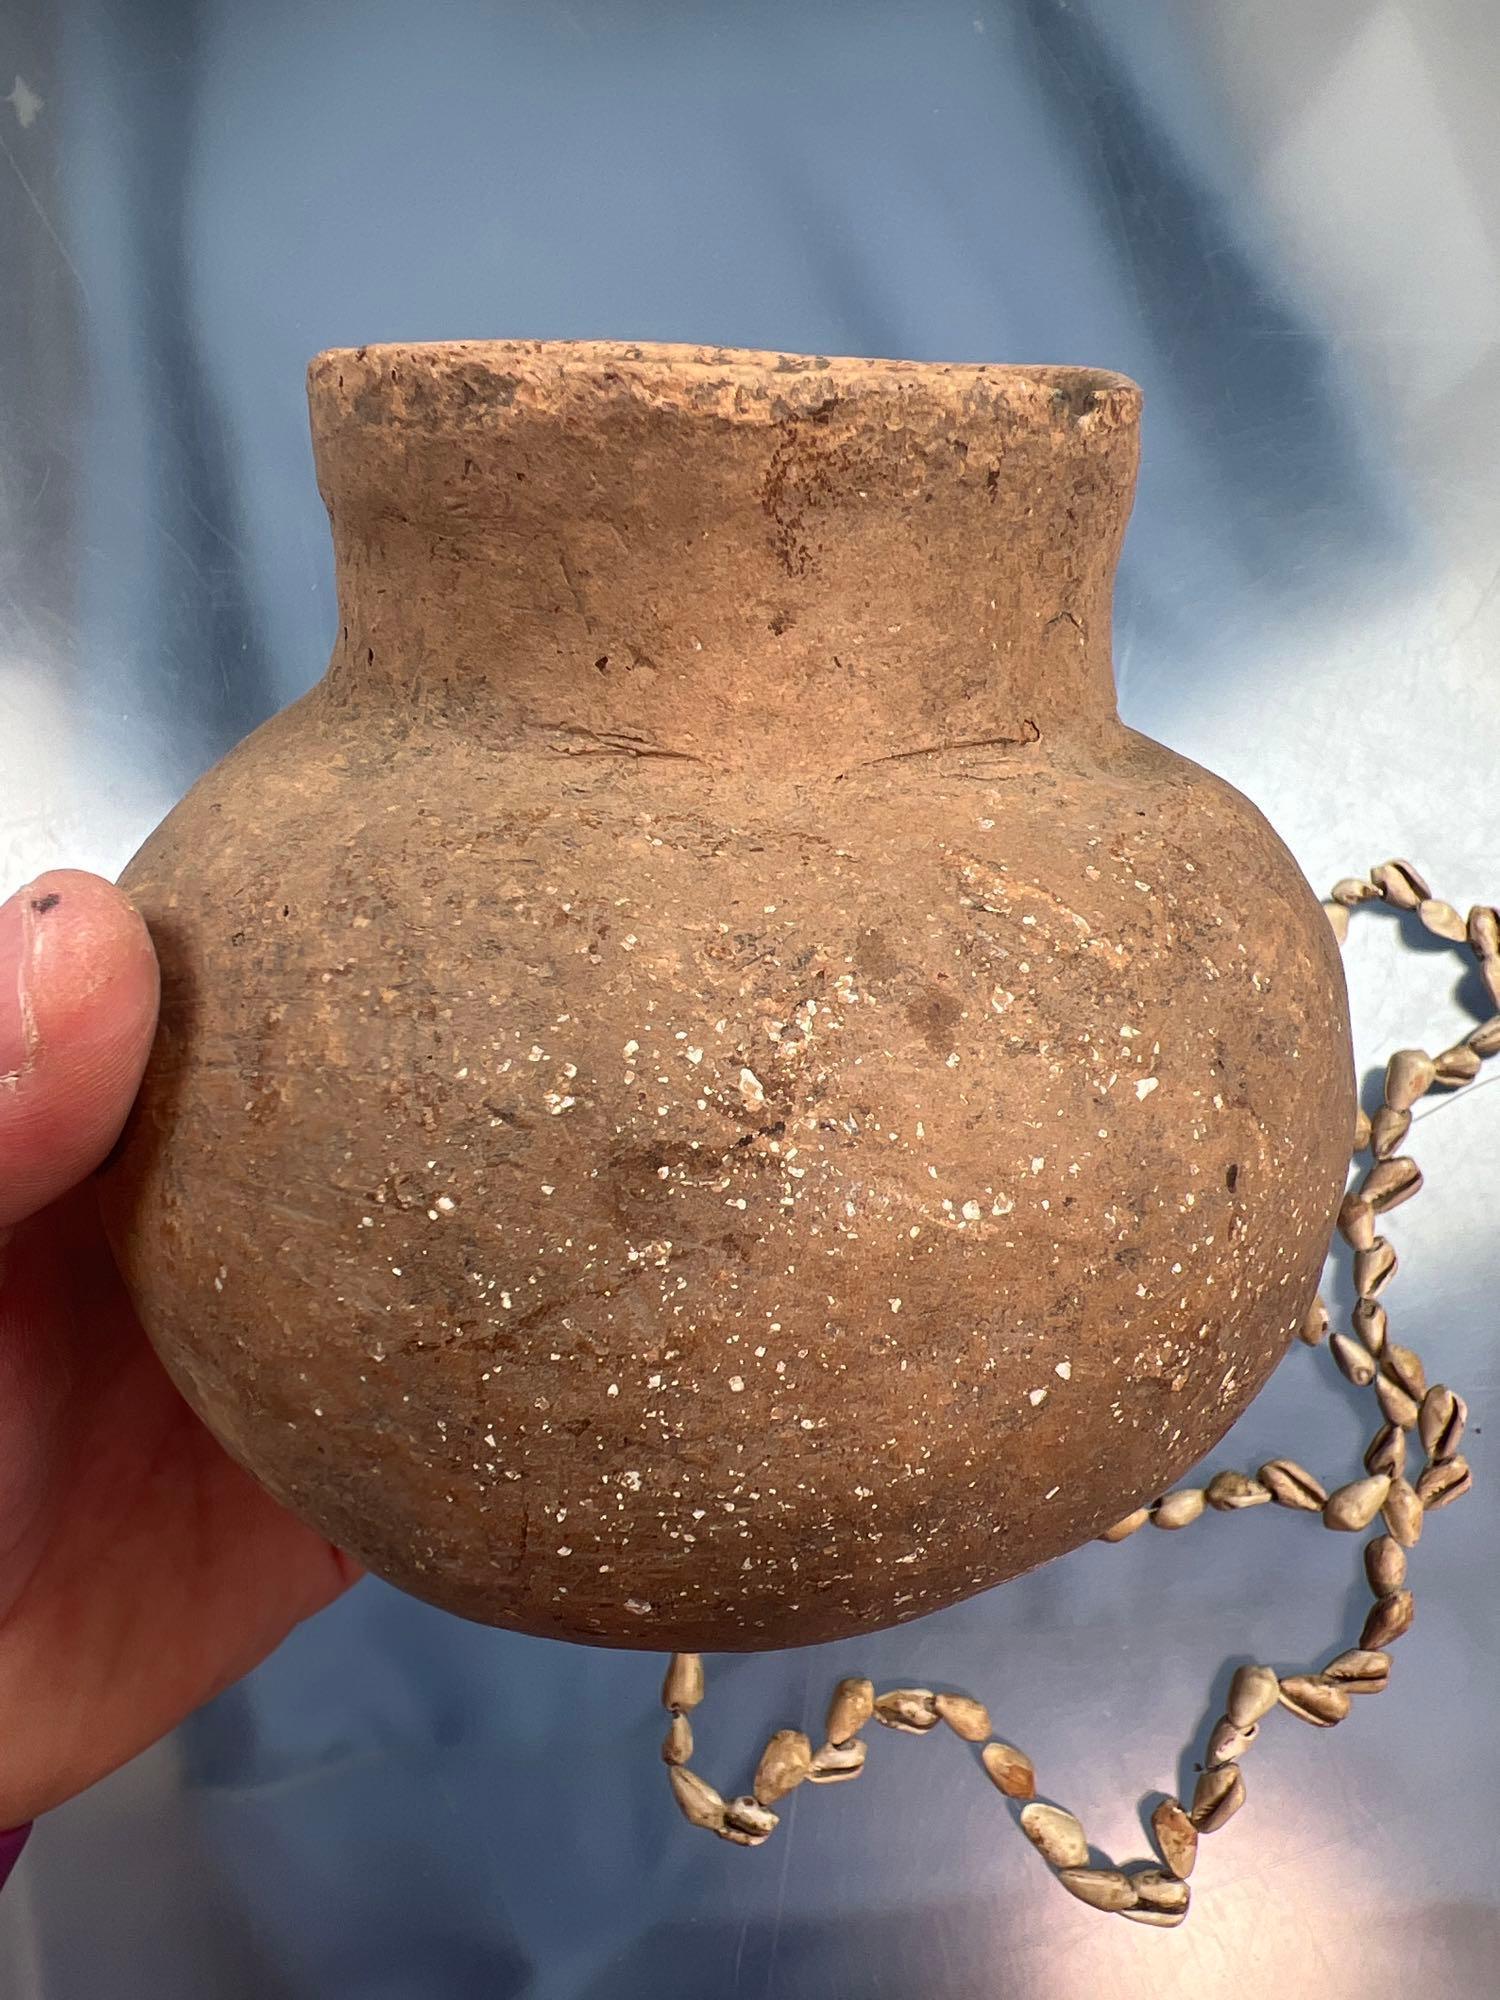 4 3/4" Missis Pottery Vessel, Found along Tennessee River, Marshal Co., Alabama w/BEADS